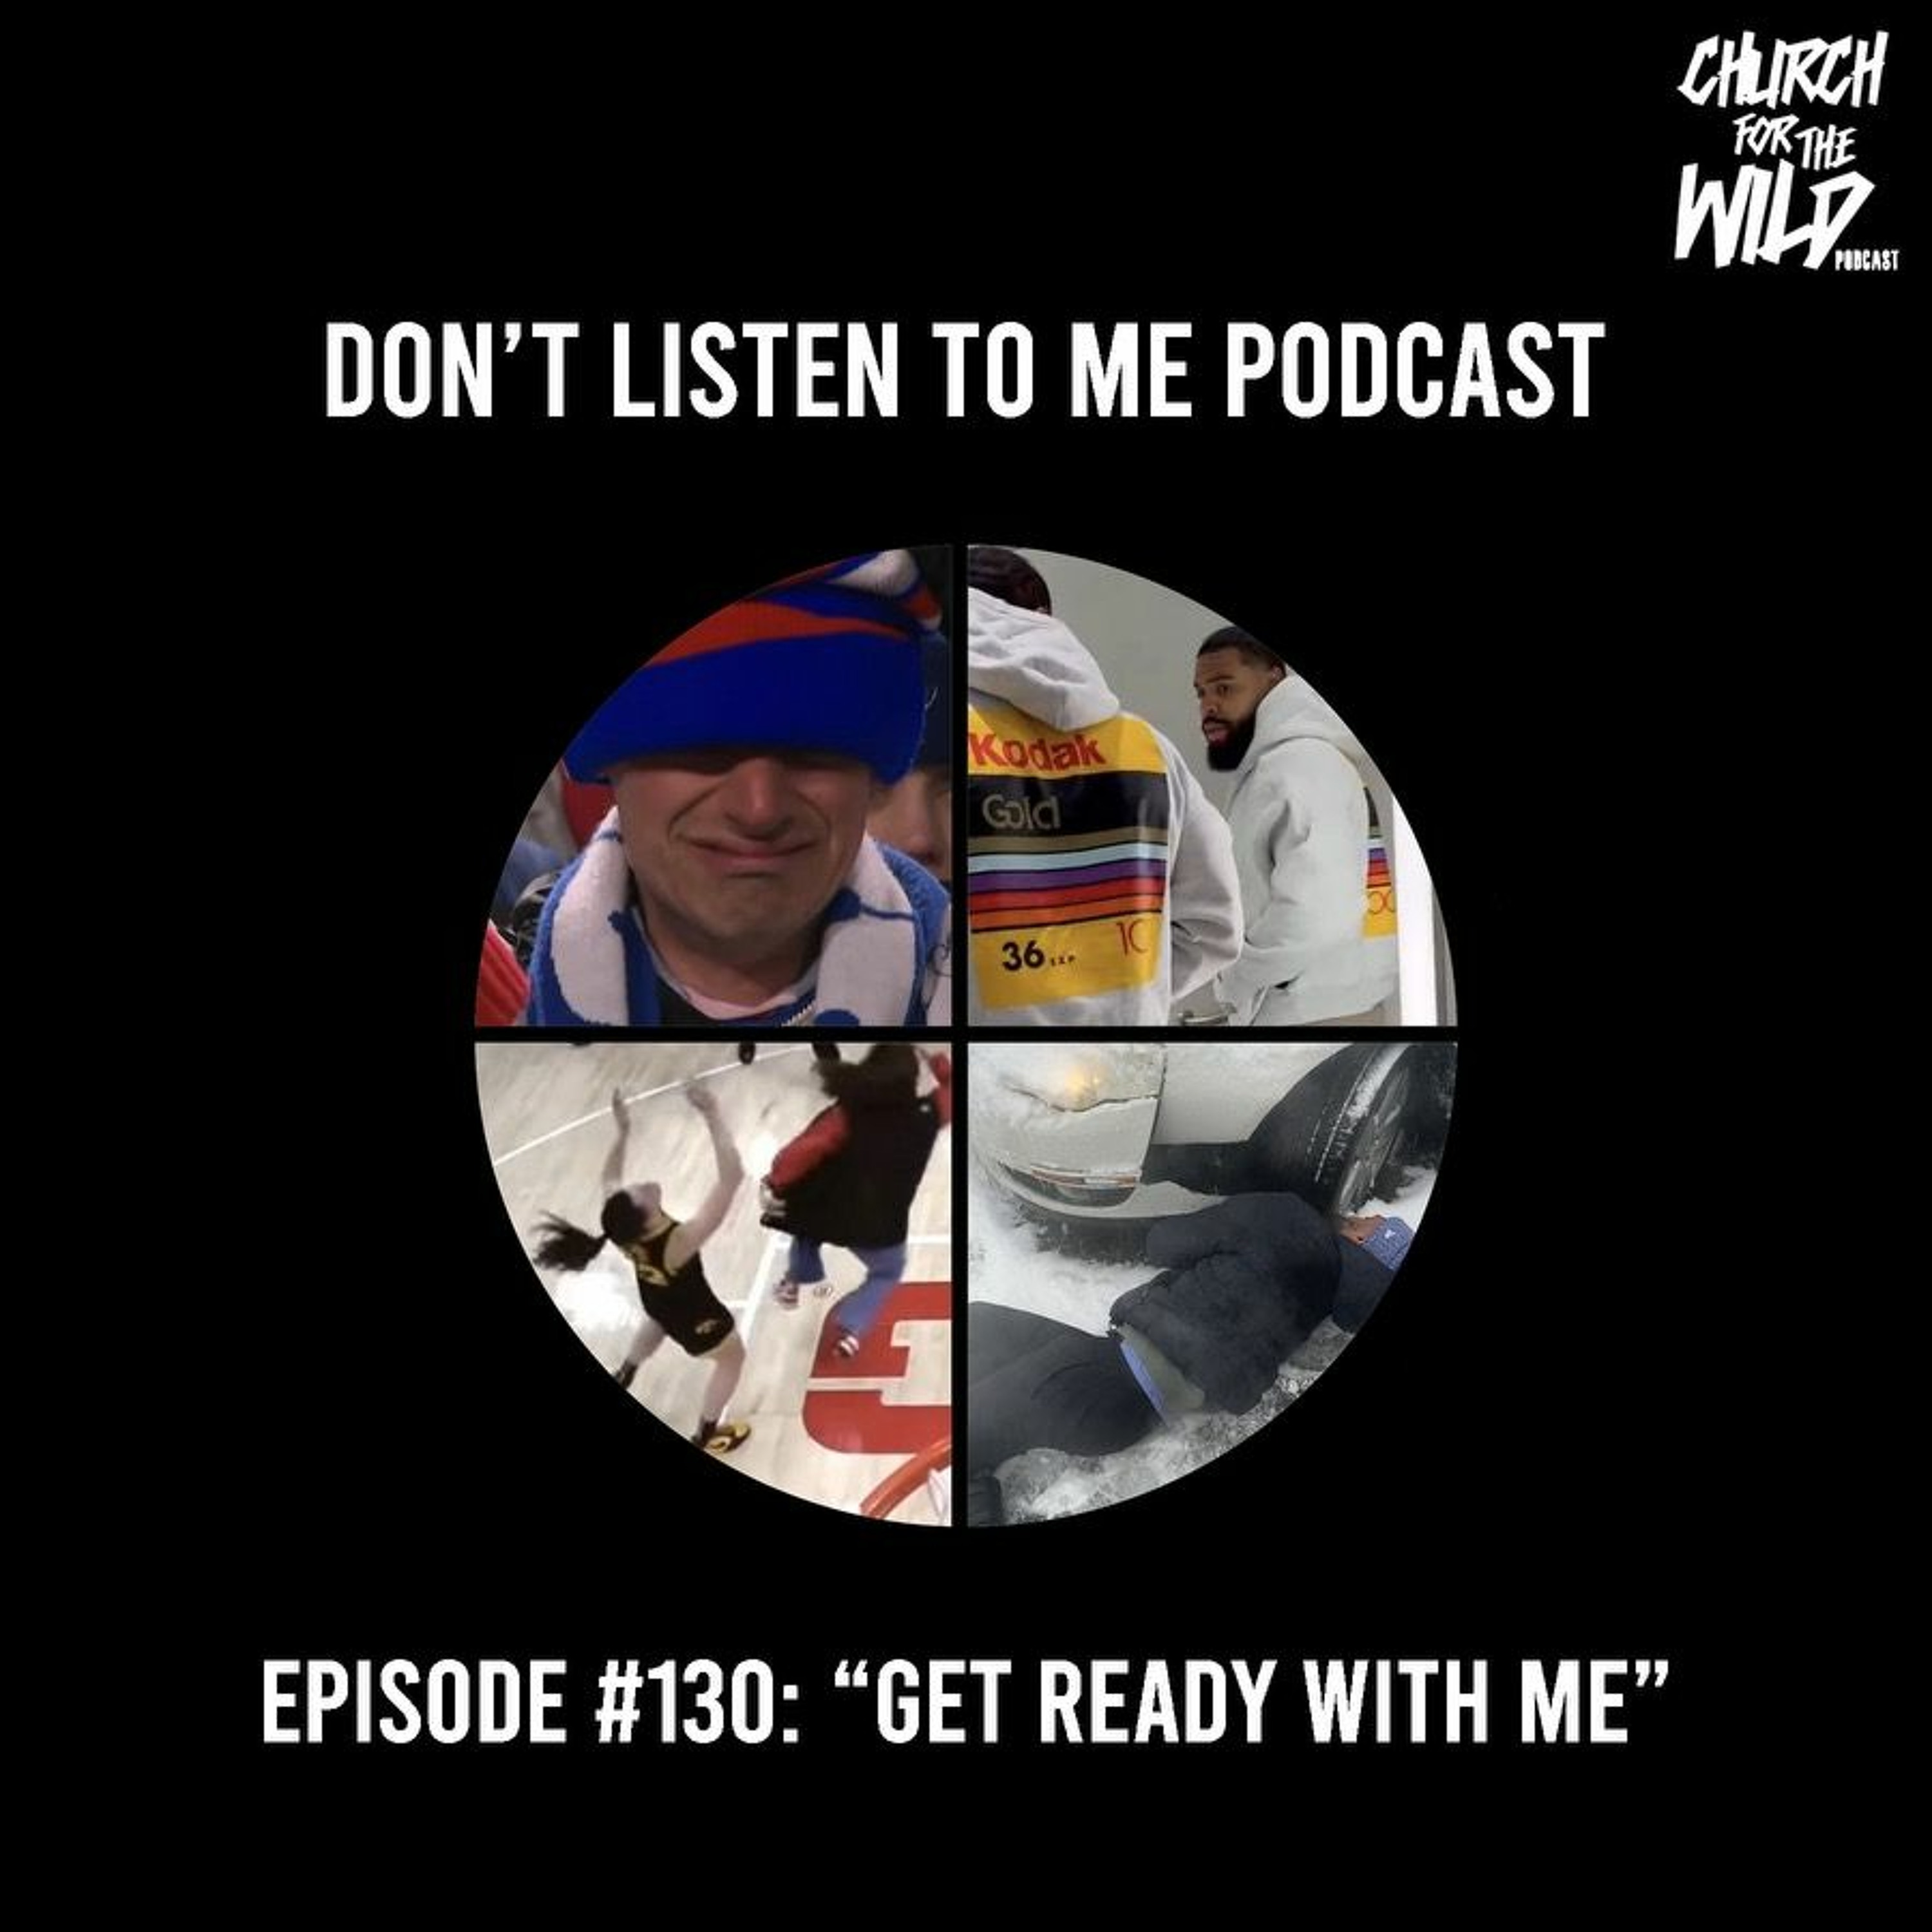 Don't Listen To Me Episode #130: "Get Ready With Me"